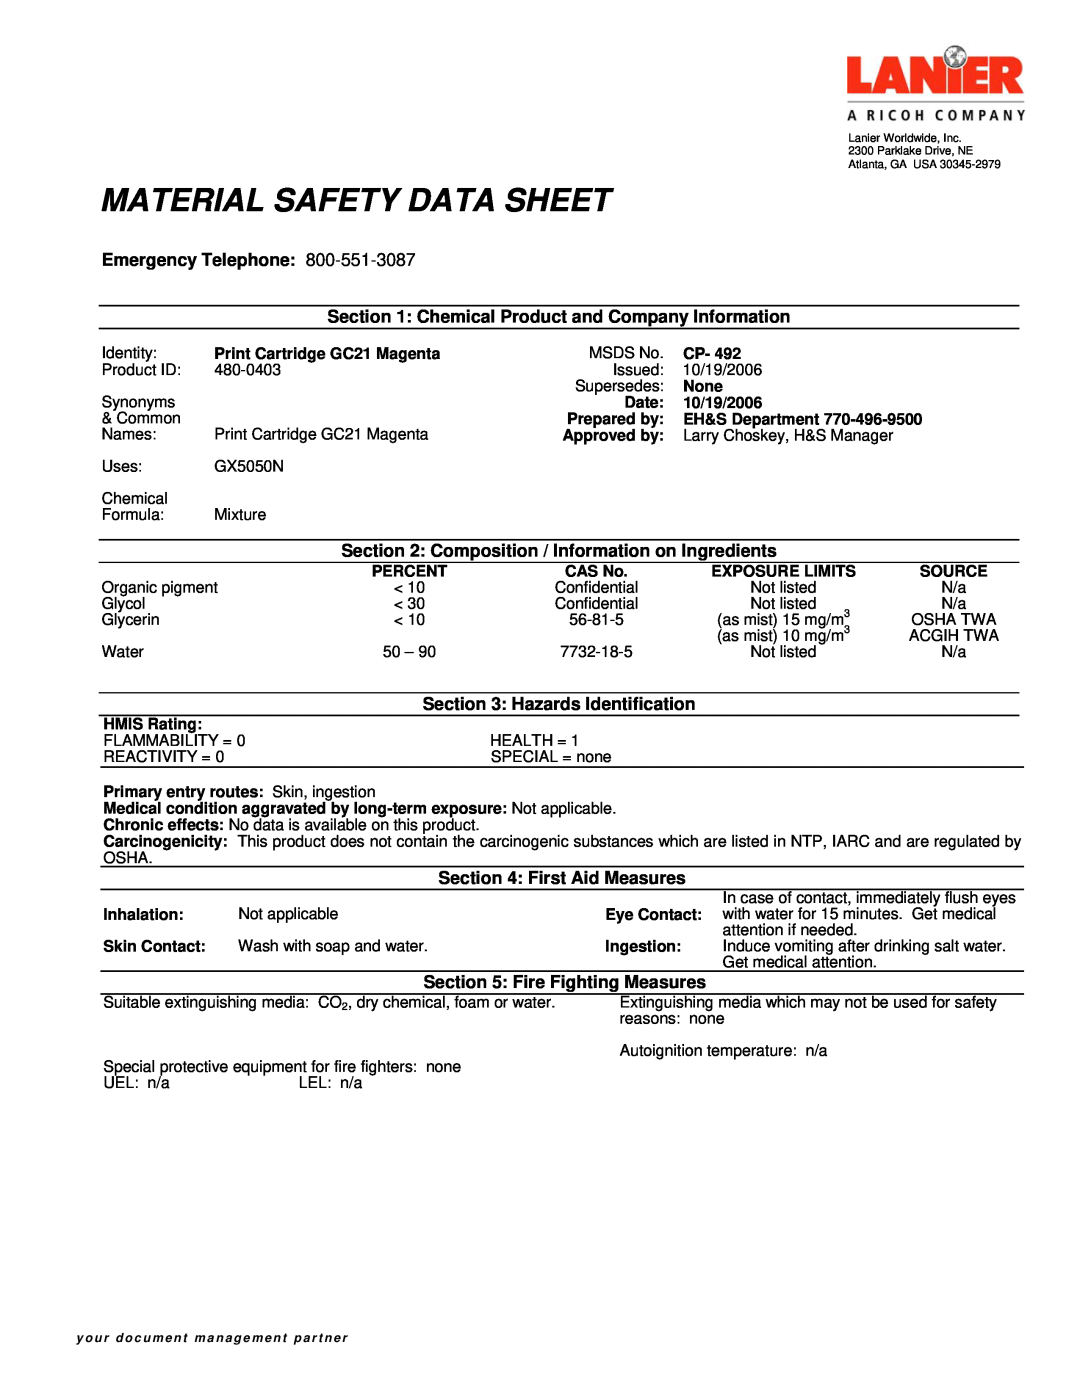 Lanier 556 manual Material Safety Data Sheet, Emergency Telephone, Hazards Identification, First Aid Measures 